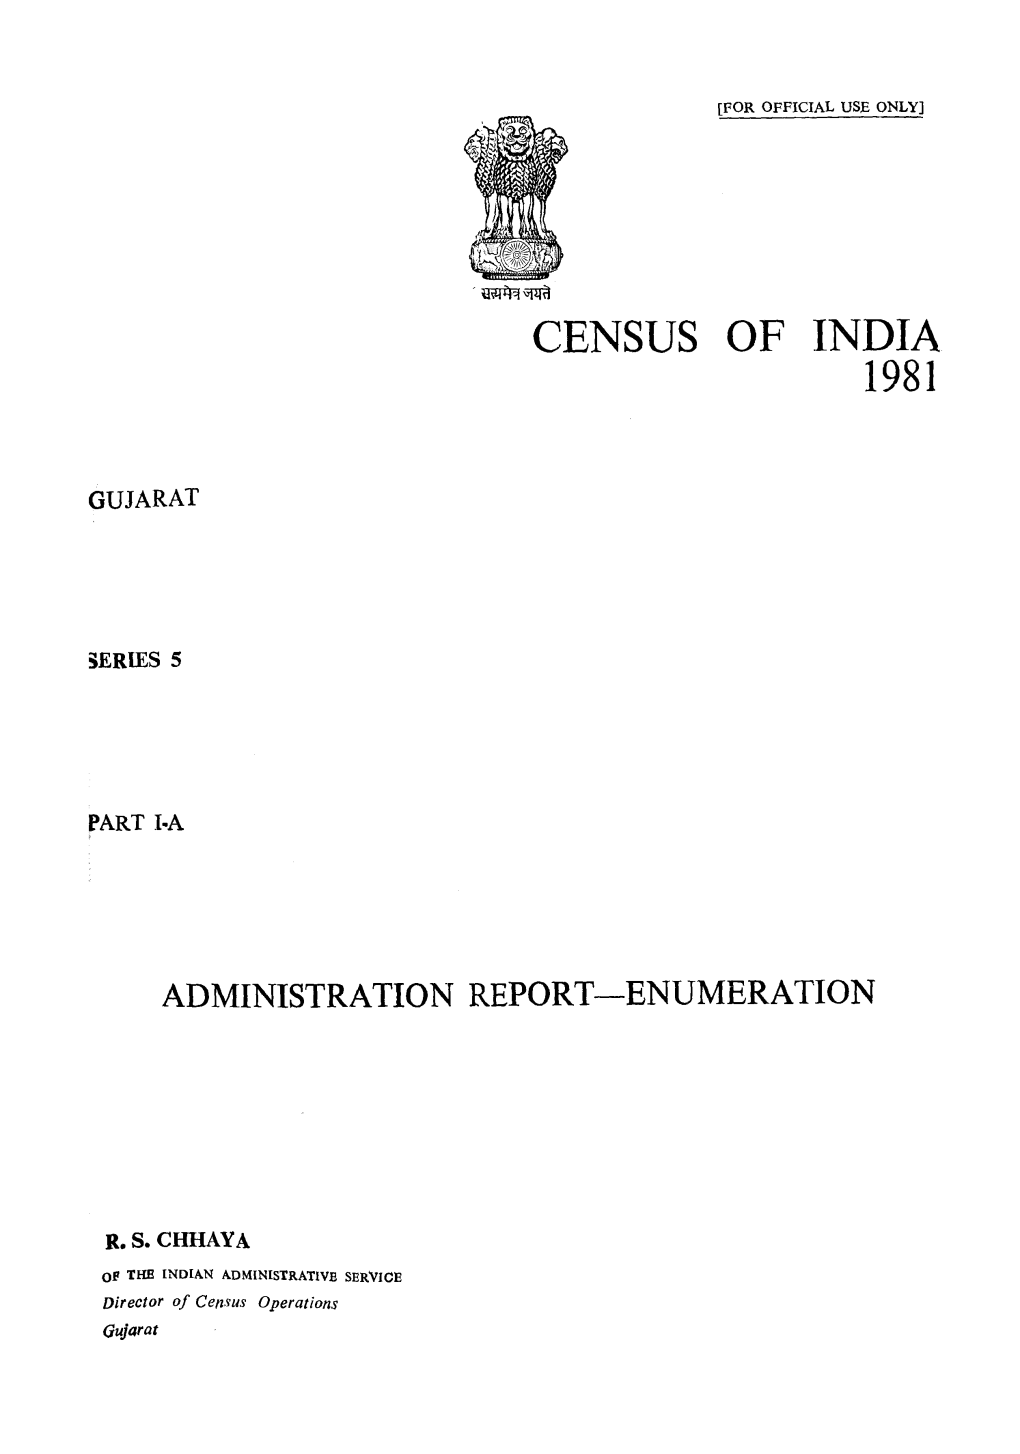 Administration Report-Enumeration, Part I-A, Series-5